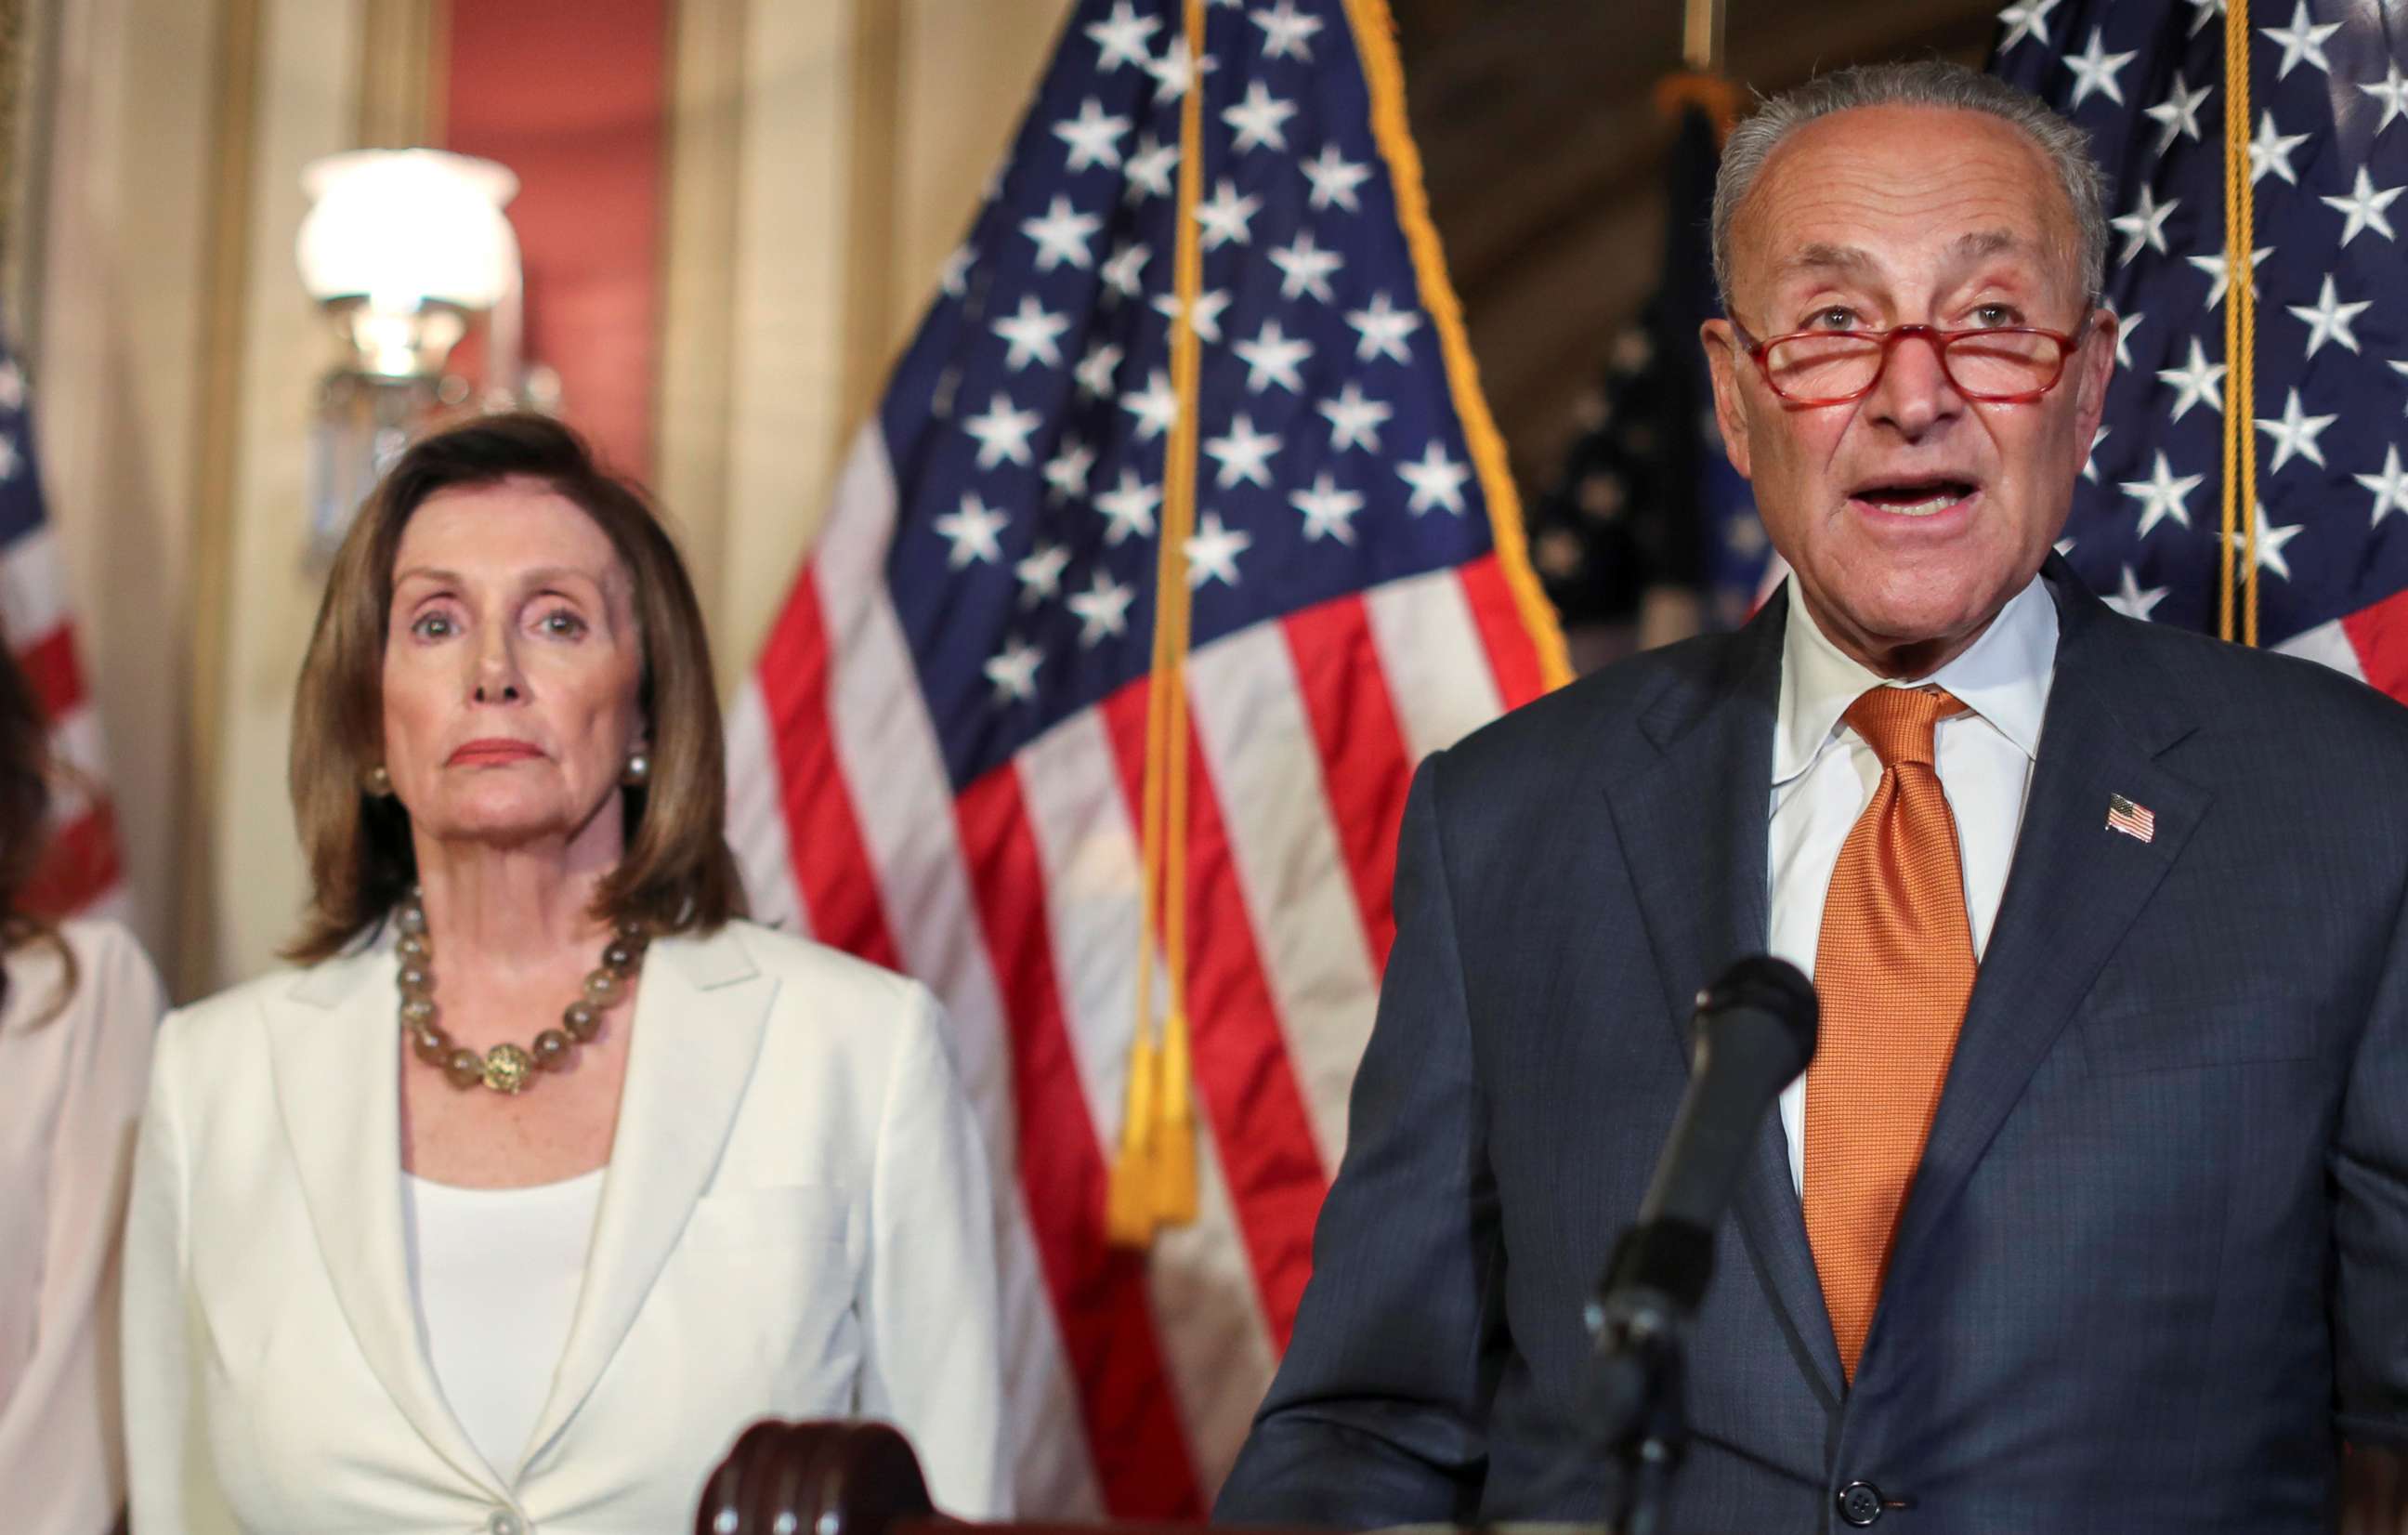 PHOTO: House Speaker Nancy Pelosi and Senate Minority Leader Chuck Schumer hold a news conference to demand that the U.S. Senate vote on the House-passed "Bipartisan Background Checks Act", in Washington, D.C., September 9, 2019.   